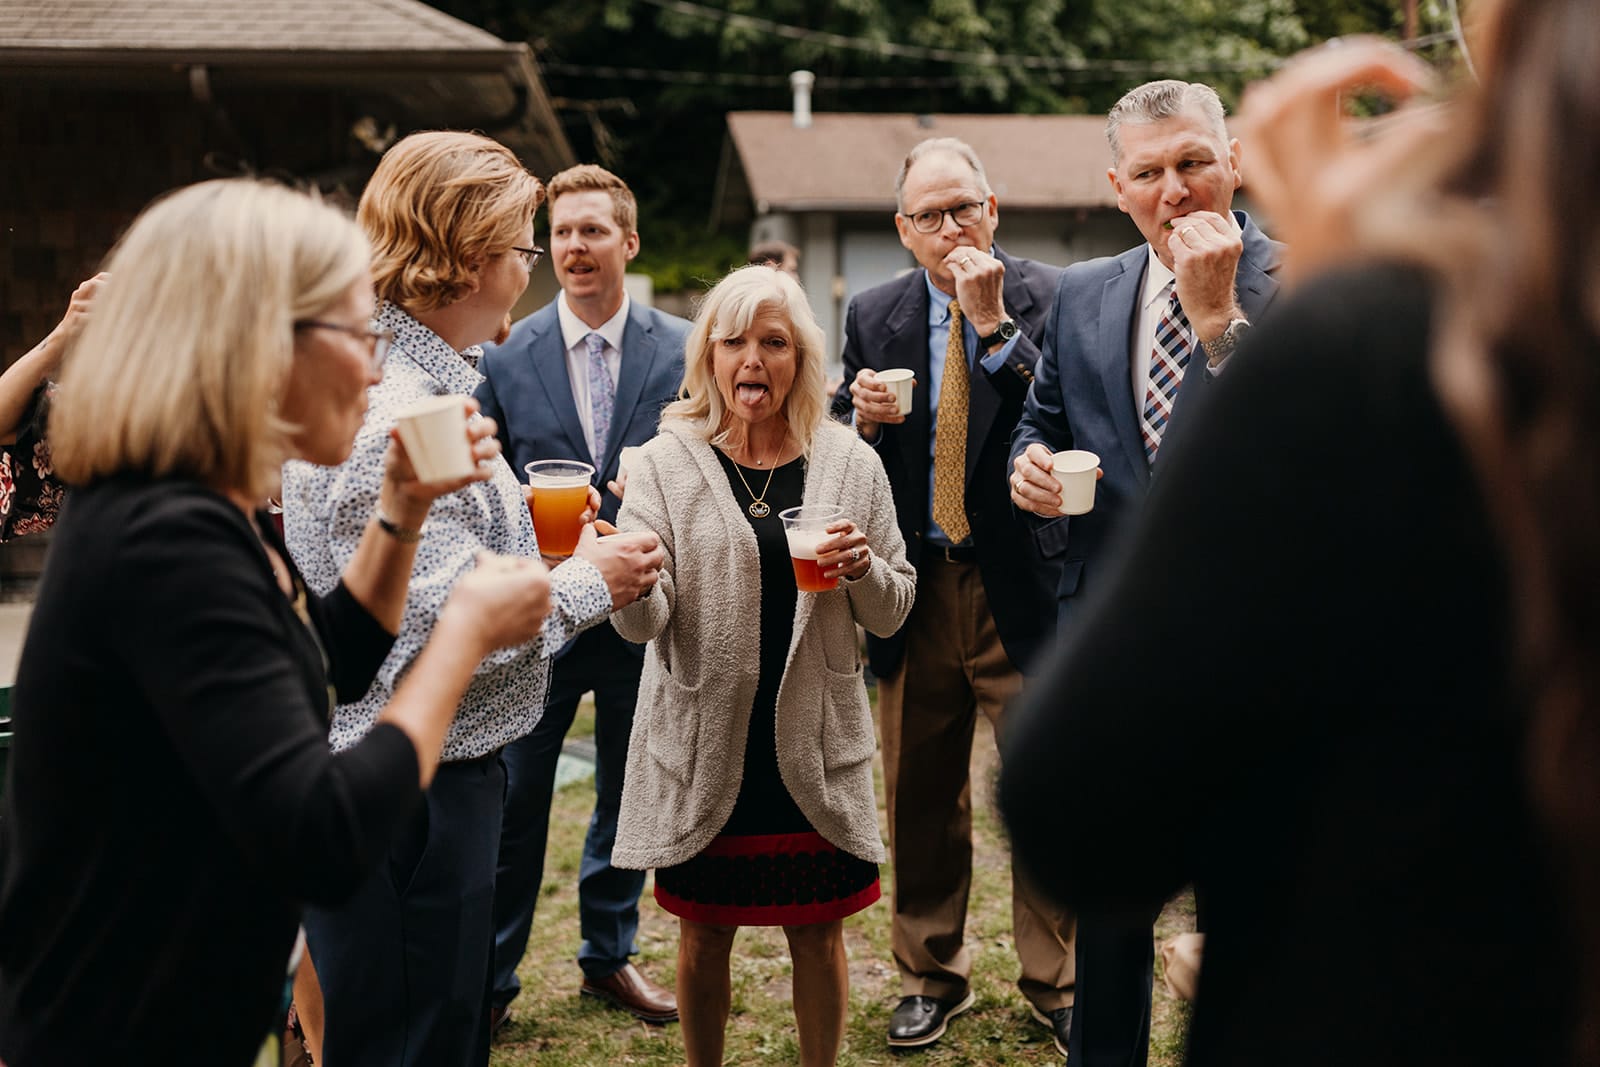 Mom takes a shot with other guests.